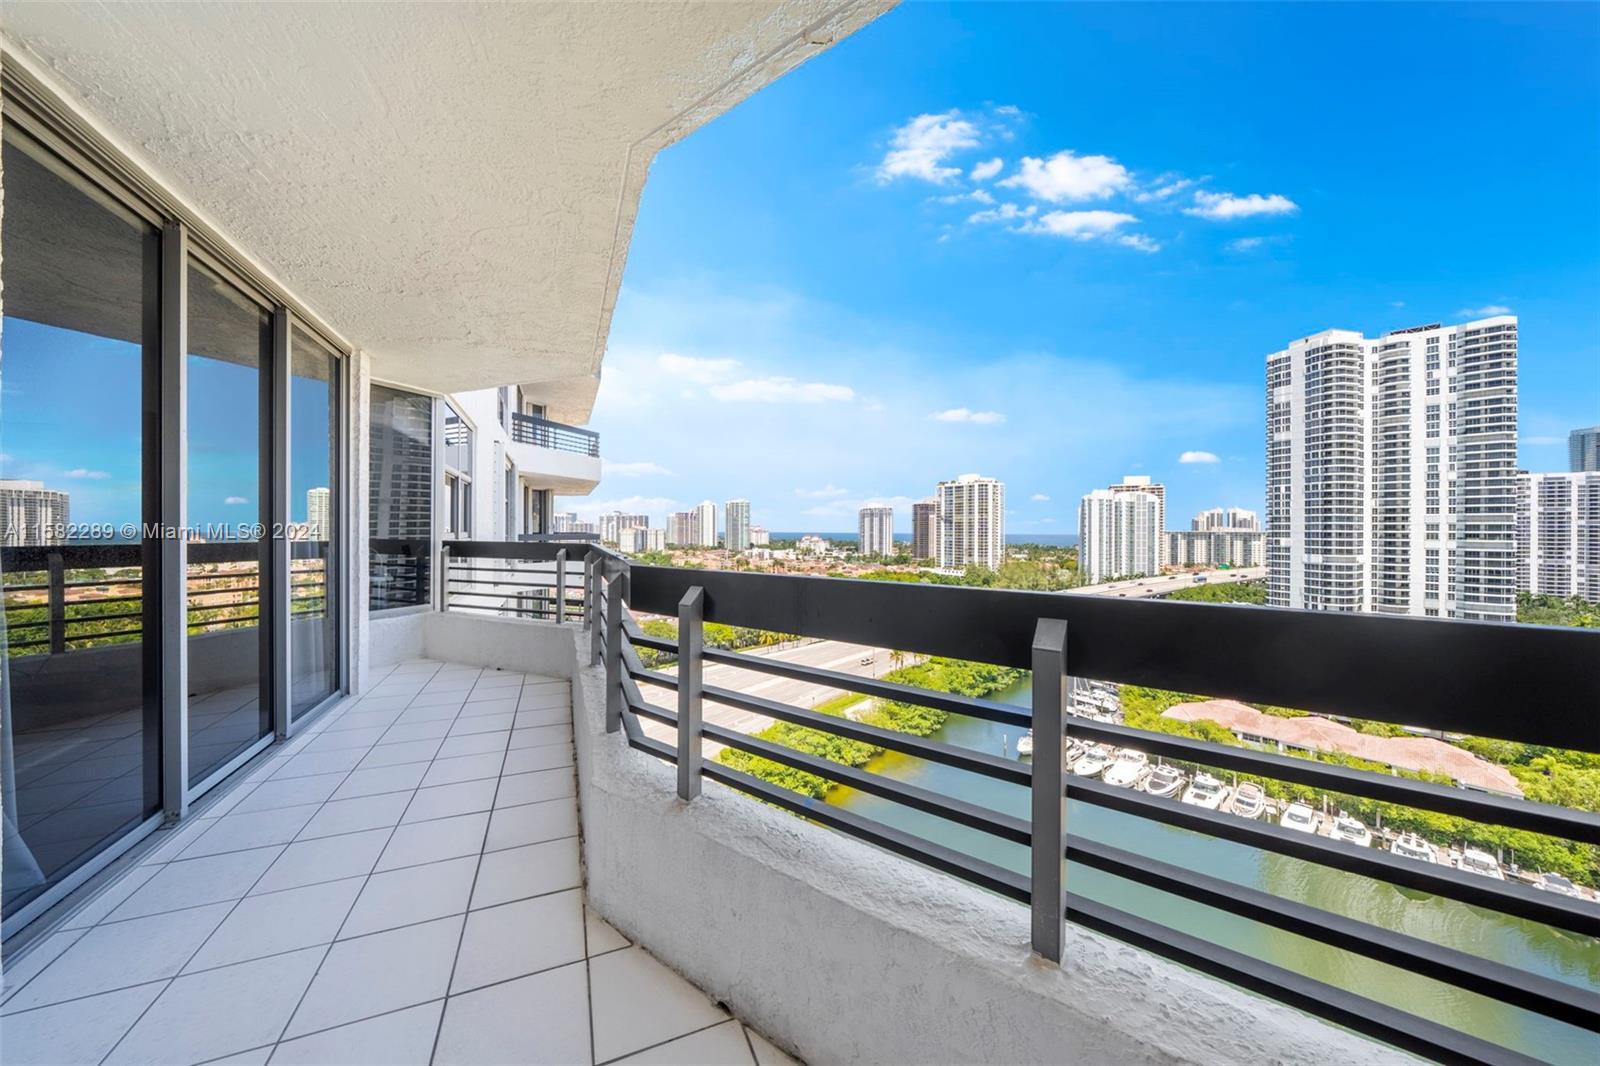 AVAILABLE From June 15 . Tenants occupied  . NEW AC installed . FURNISHED. 2 BR/BA split floorplan in the prestigious Mystic Pointe Tower 600. Facing to Intracoastal and Ocean. Walking distance to Aventura Mall, Sunny Isles Beach and Founders Park. Best schools in the area. Come see it and enjoy all that Aventura offers. 24 hour notice is required. ****Building requires 700++ credit scores for approval. No exceptions! Annual Lease ONLY****